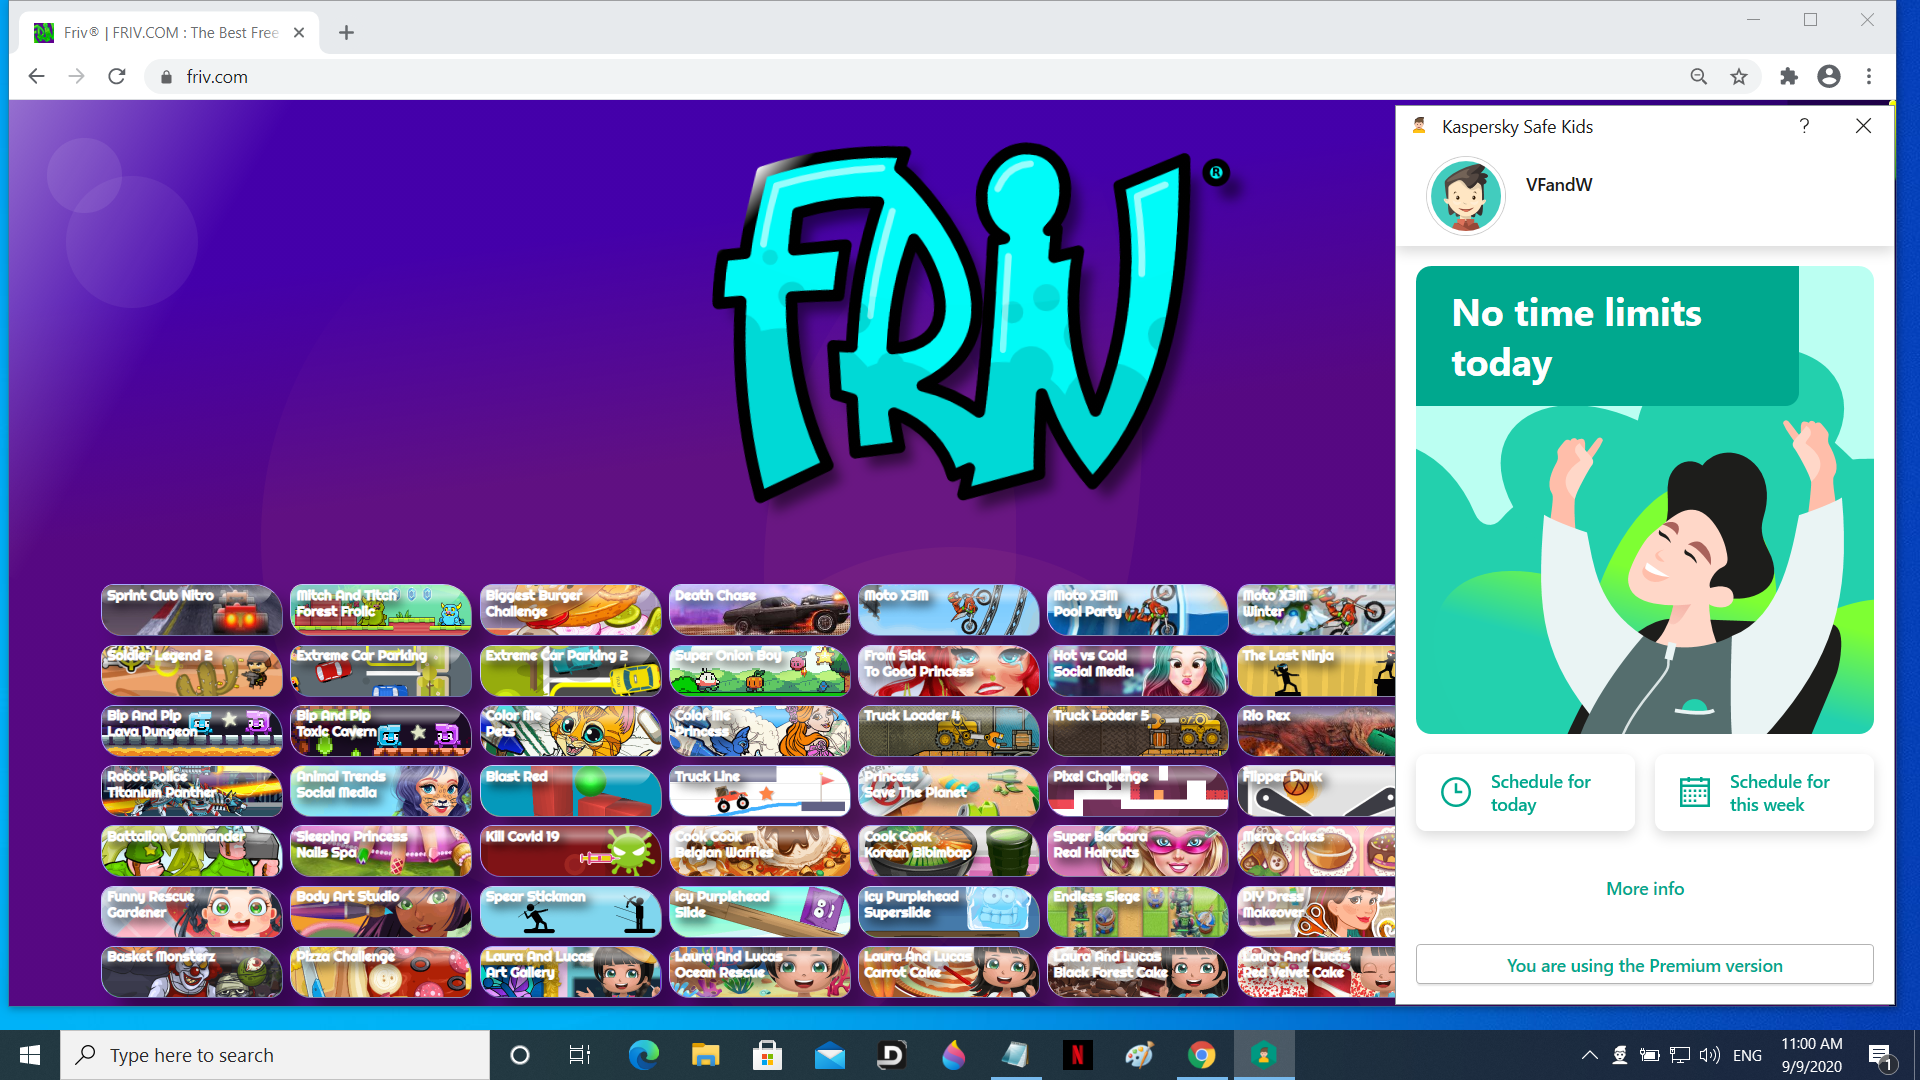 Friv.com - The best and most complete variety of games when I was a kid.